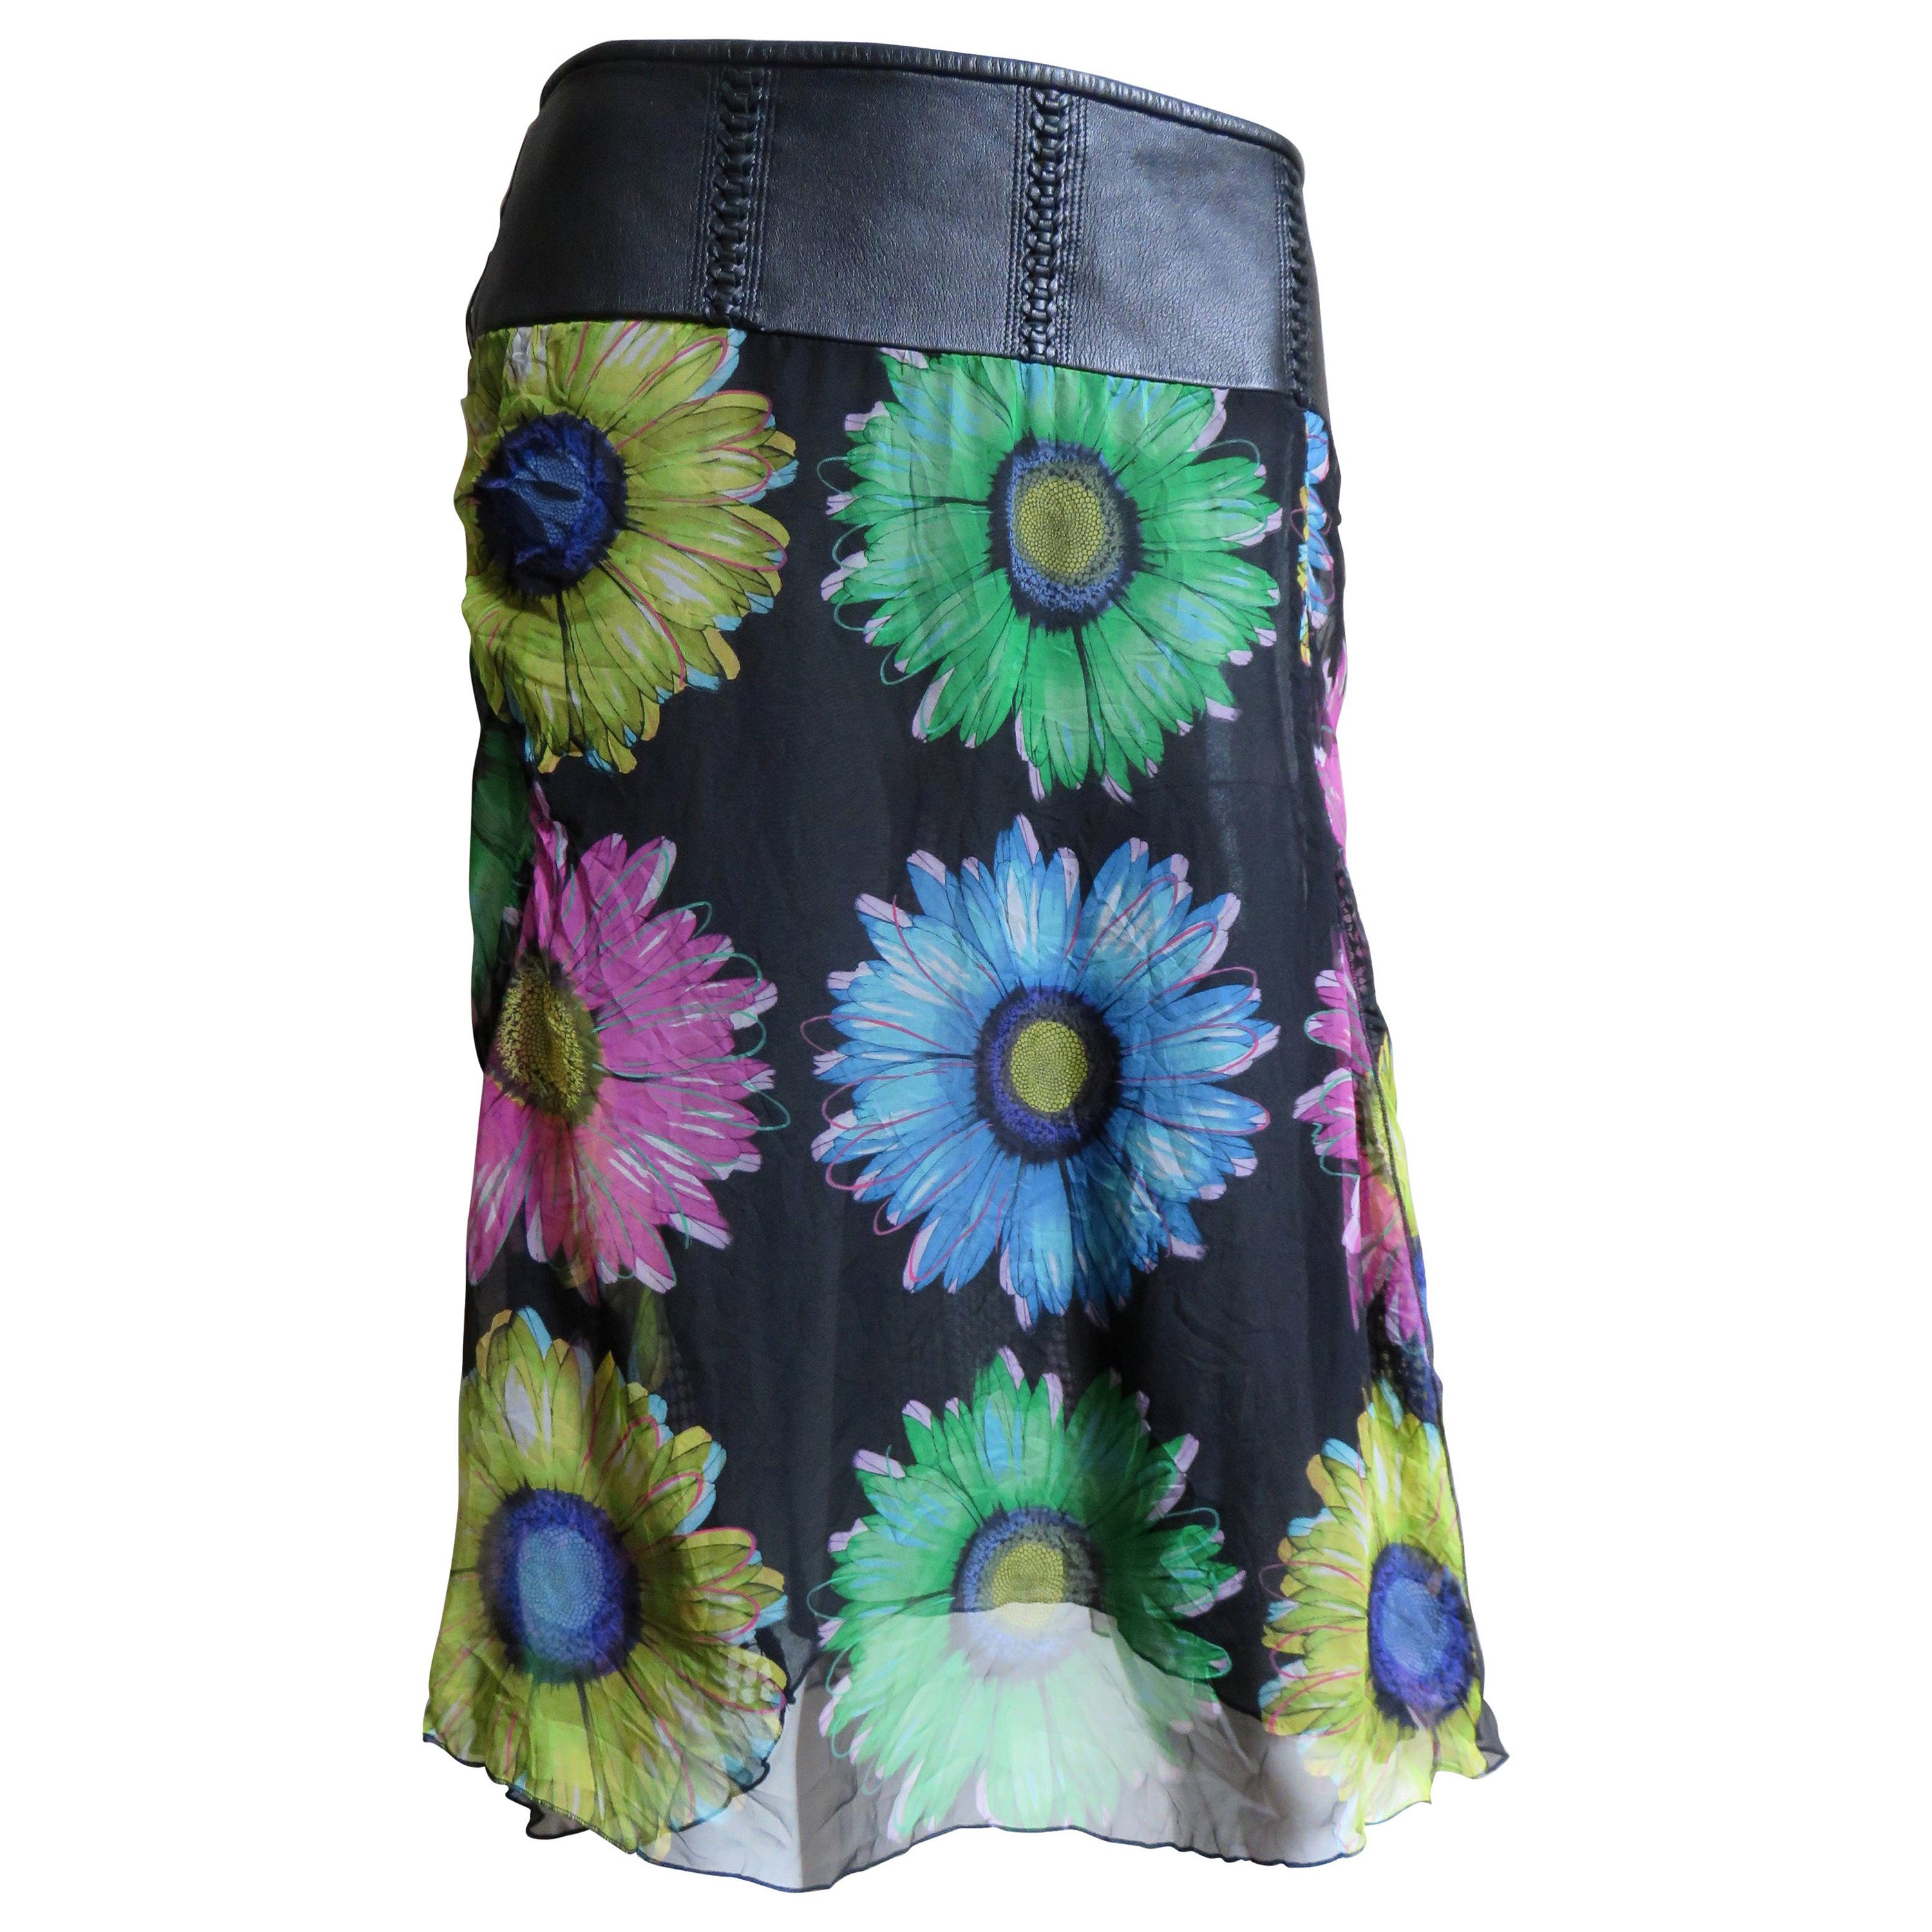 Gianni Versace Silk Skirt with Leather Band 1990s